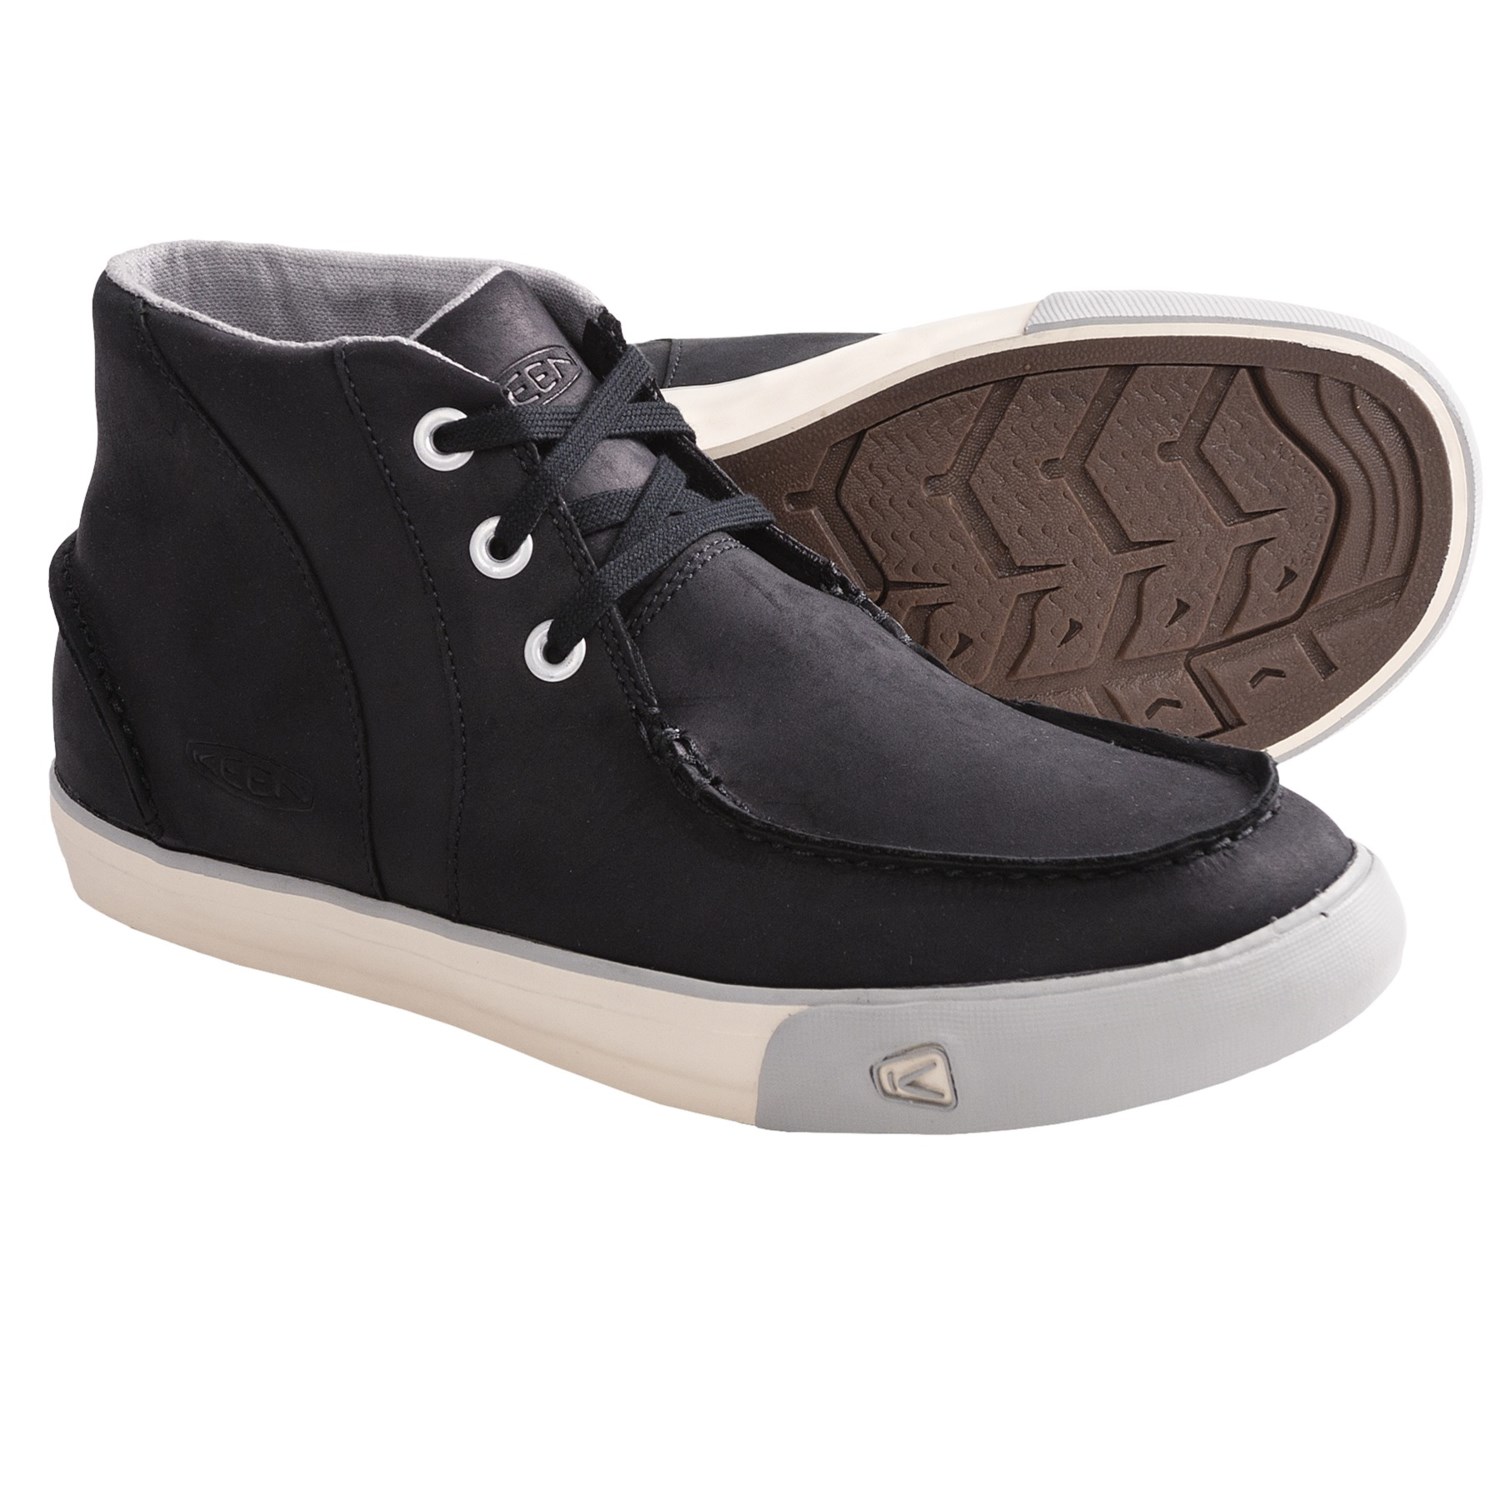 Keen Timmons Chukka Sneakers - Nubuck (For Men) in BlackDrizzle